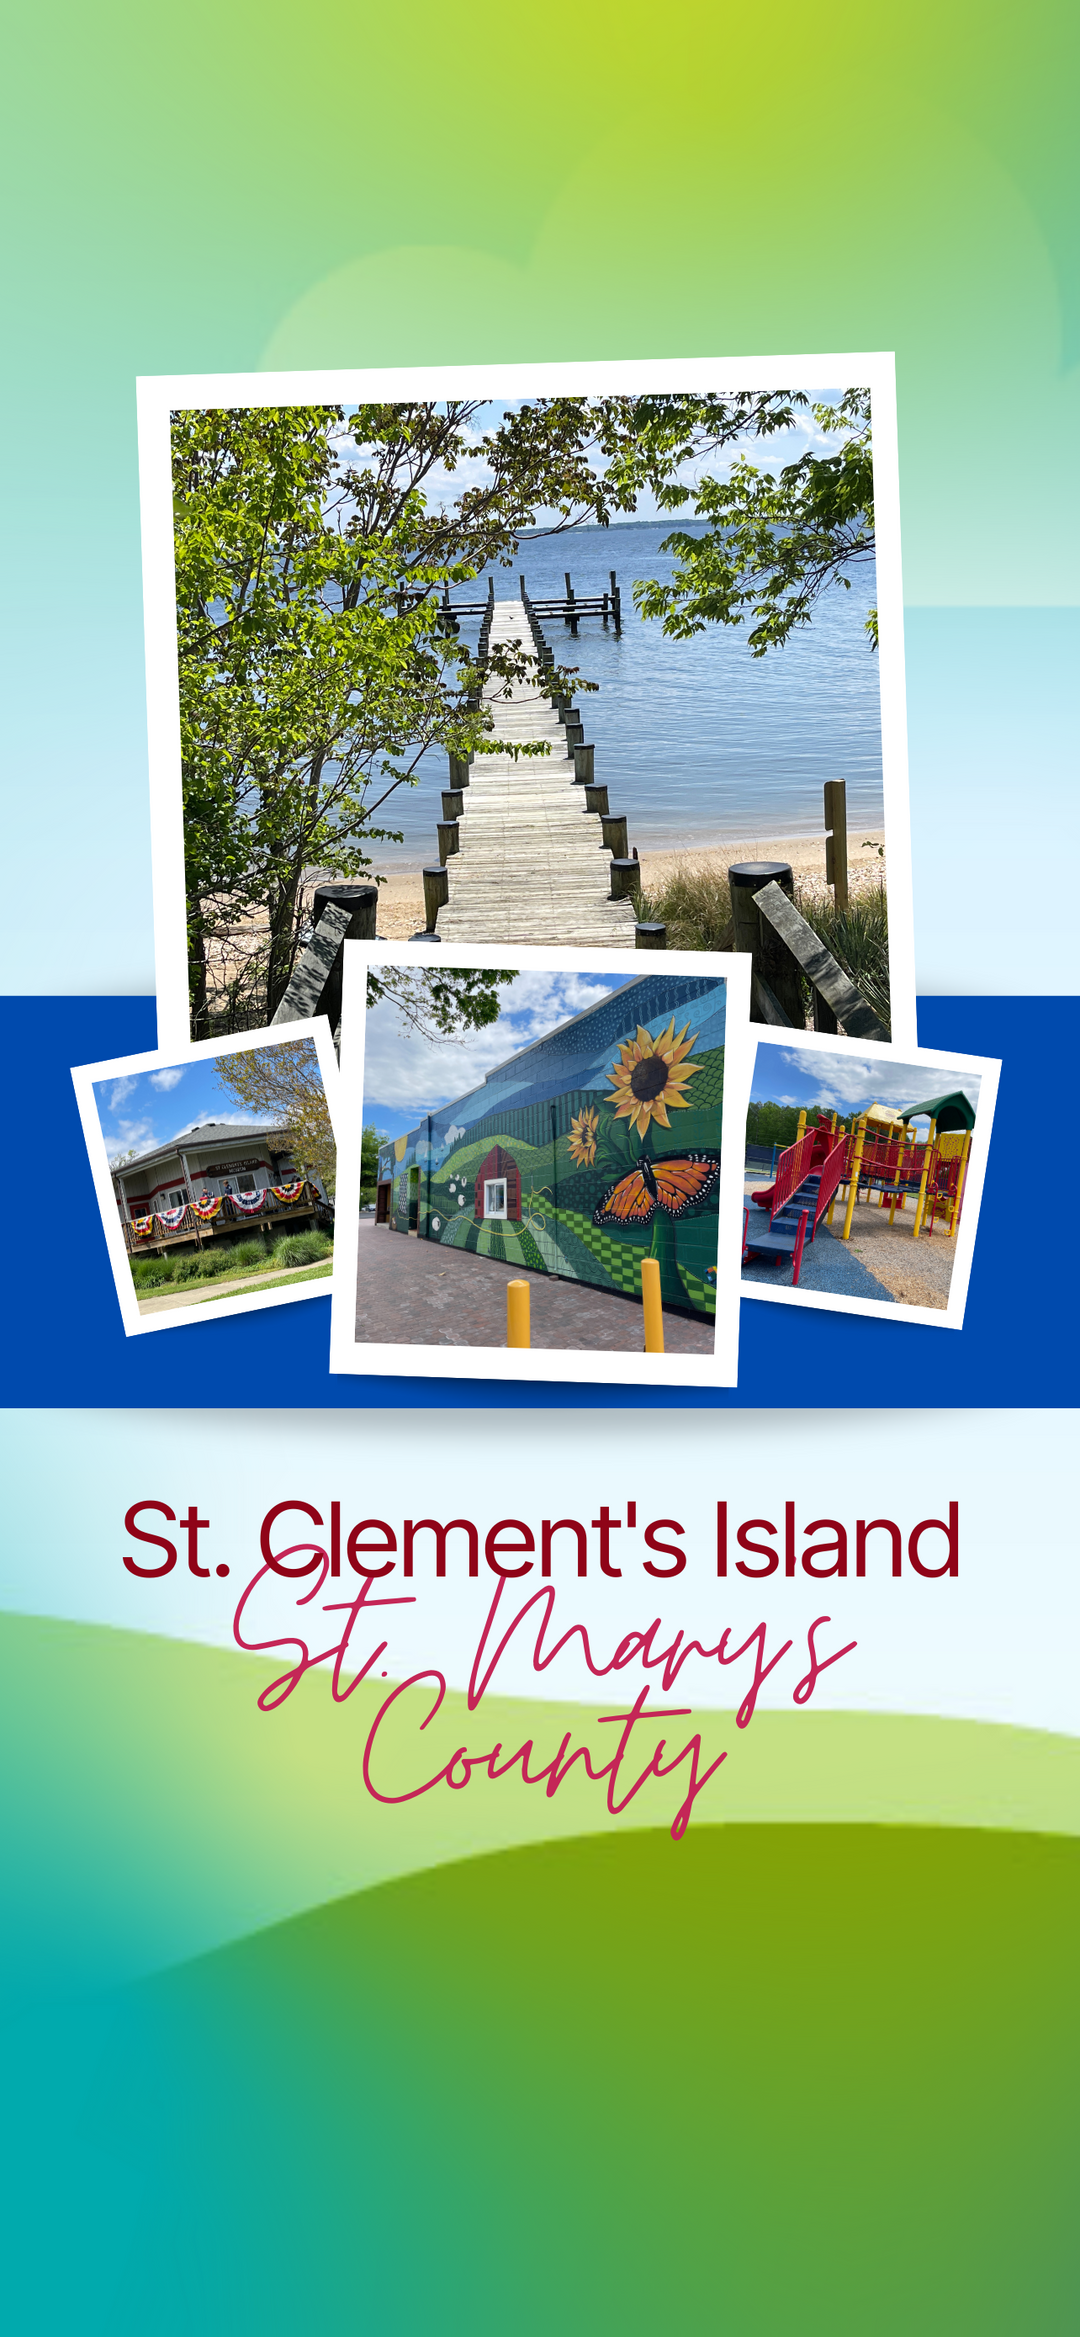 St. Clement's Island Day Trip Itinerary